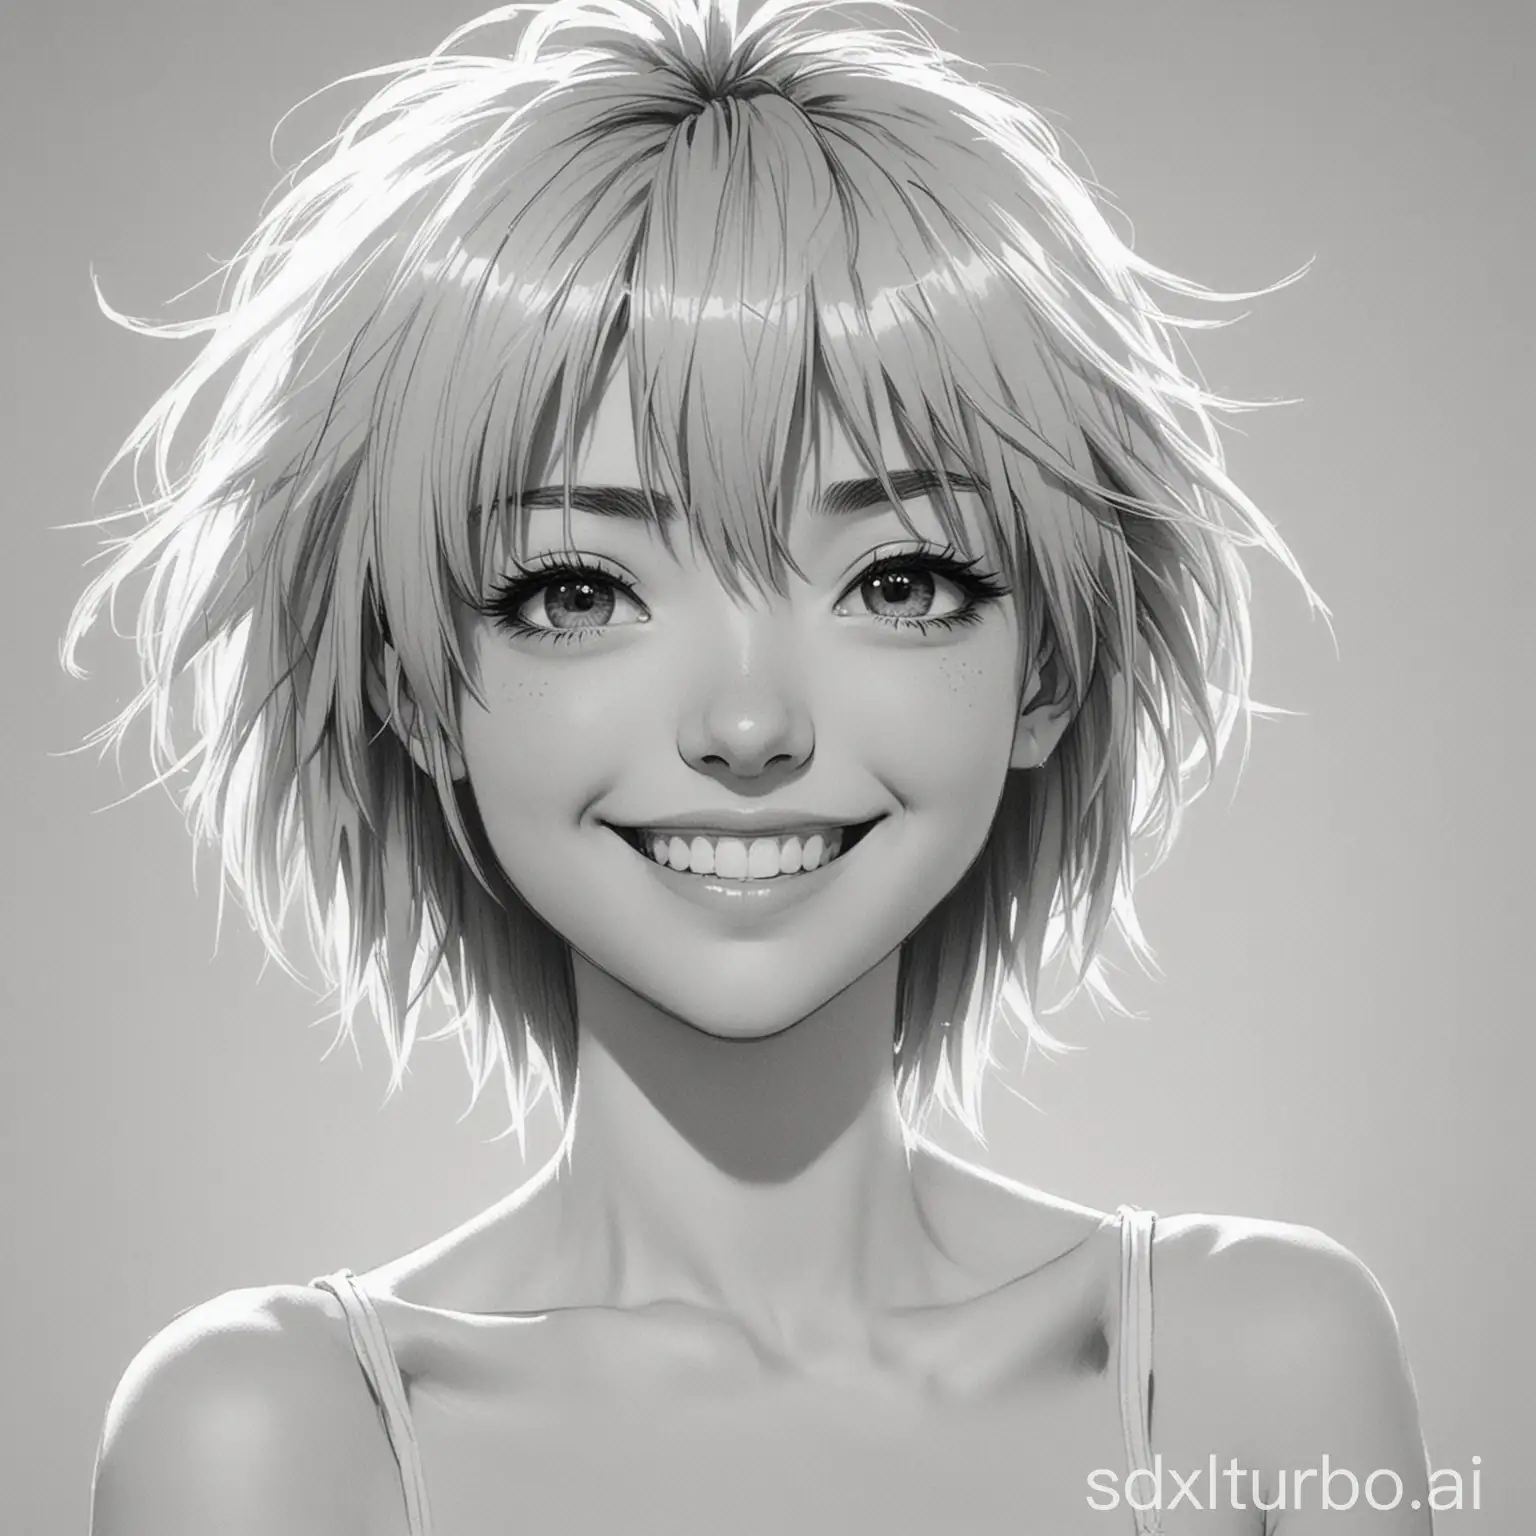 Smiling-Manga-Girl-with-Spiked-Hair-Monochrome-Sketch-Drawing